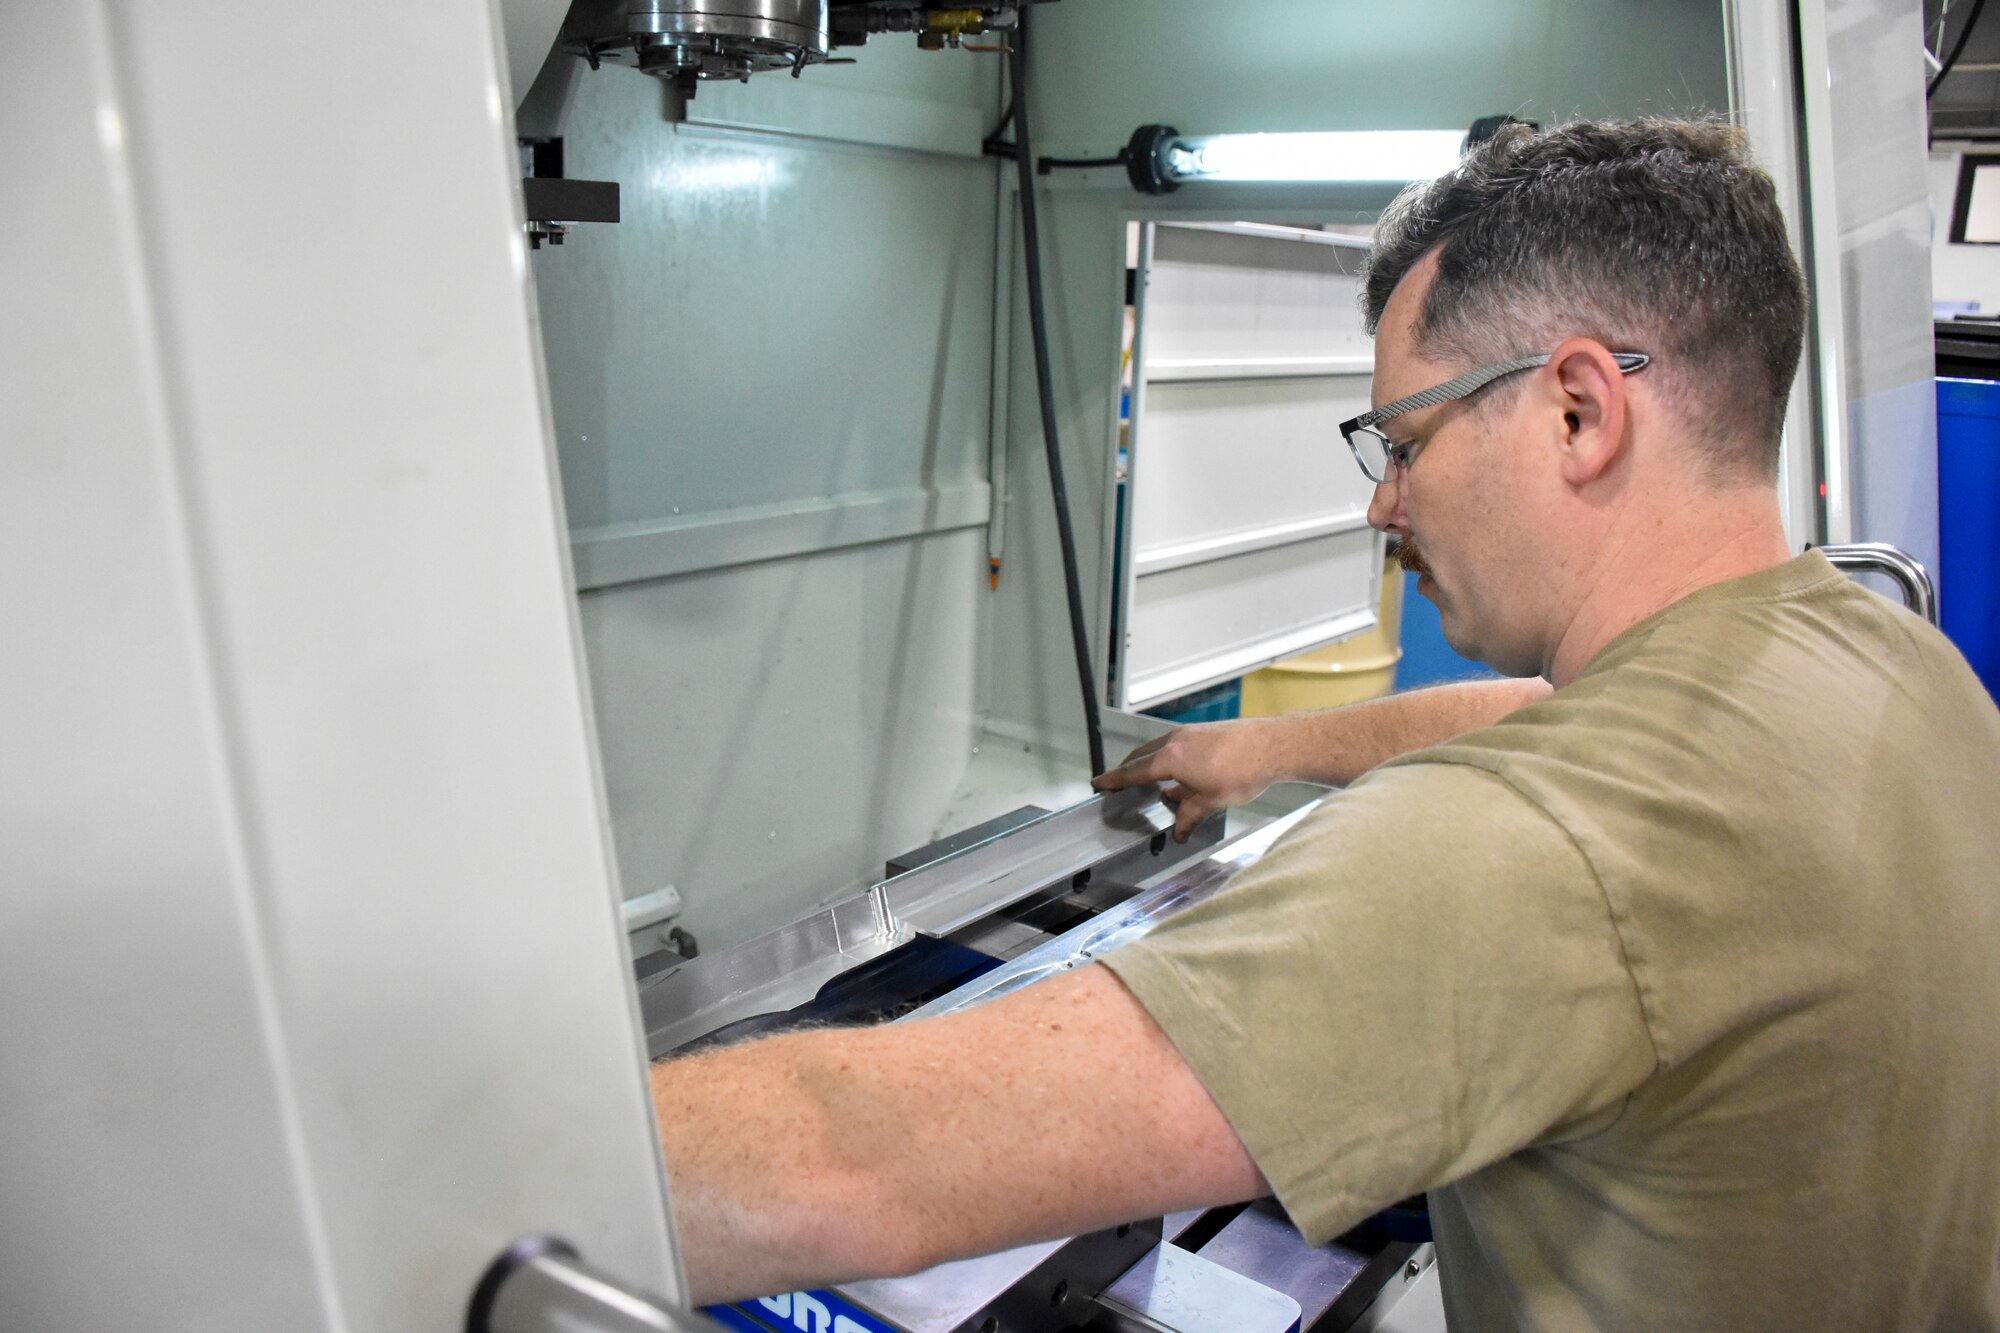 U.S. Air Force Staff Sgt. Johnathan Shellhart, a machinist with the 442d Maintenance Squadron, places a piece of stock into a CNC mill